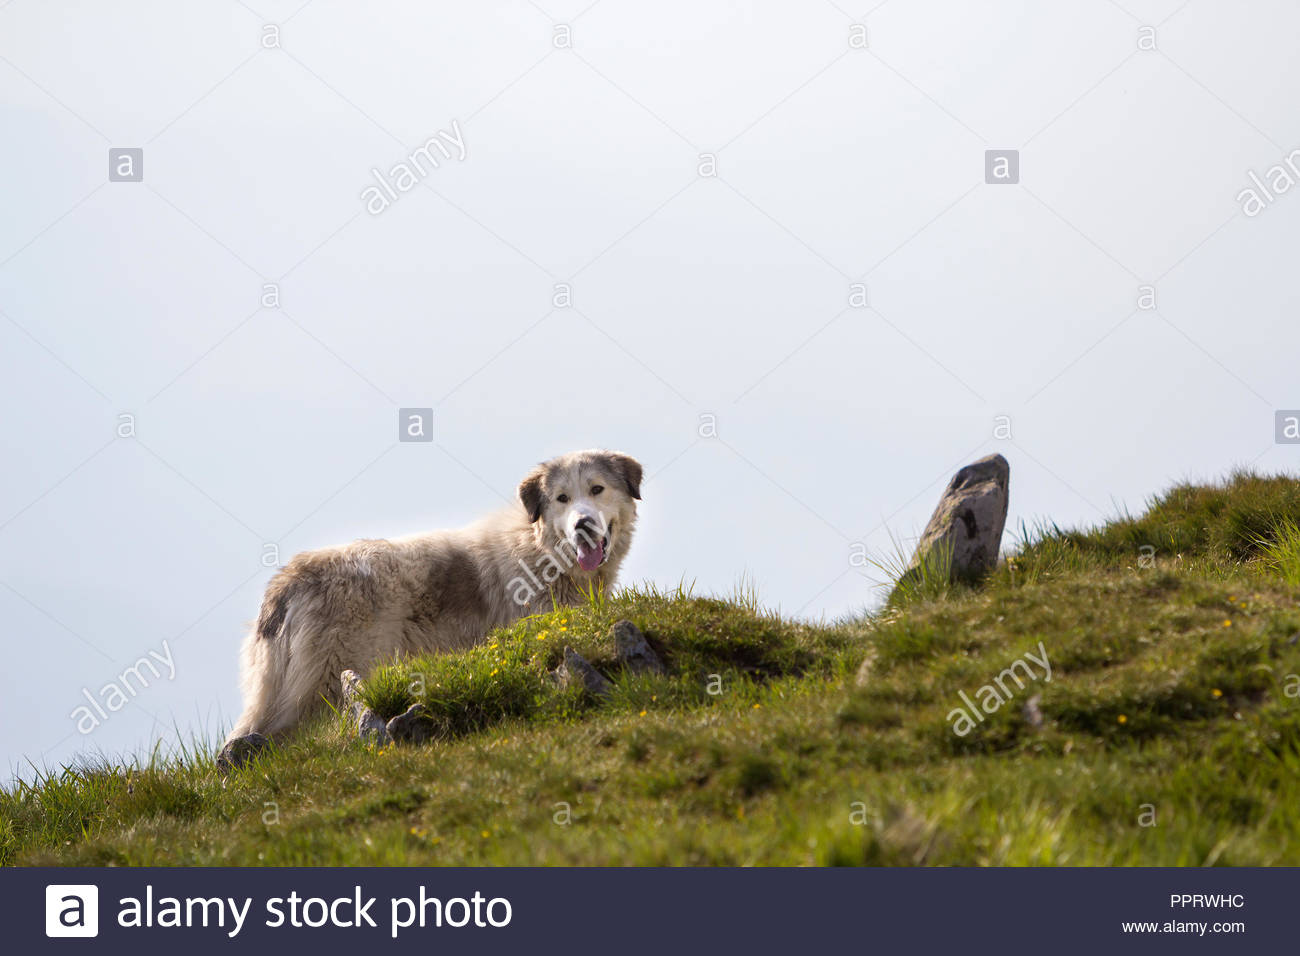 Big White Shaggy Grown Clever Shepherd Dog Standing Alone On Steep